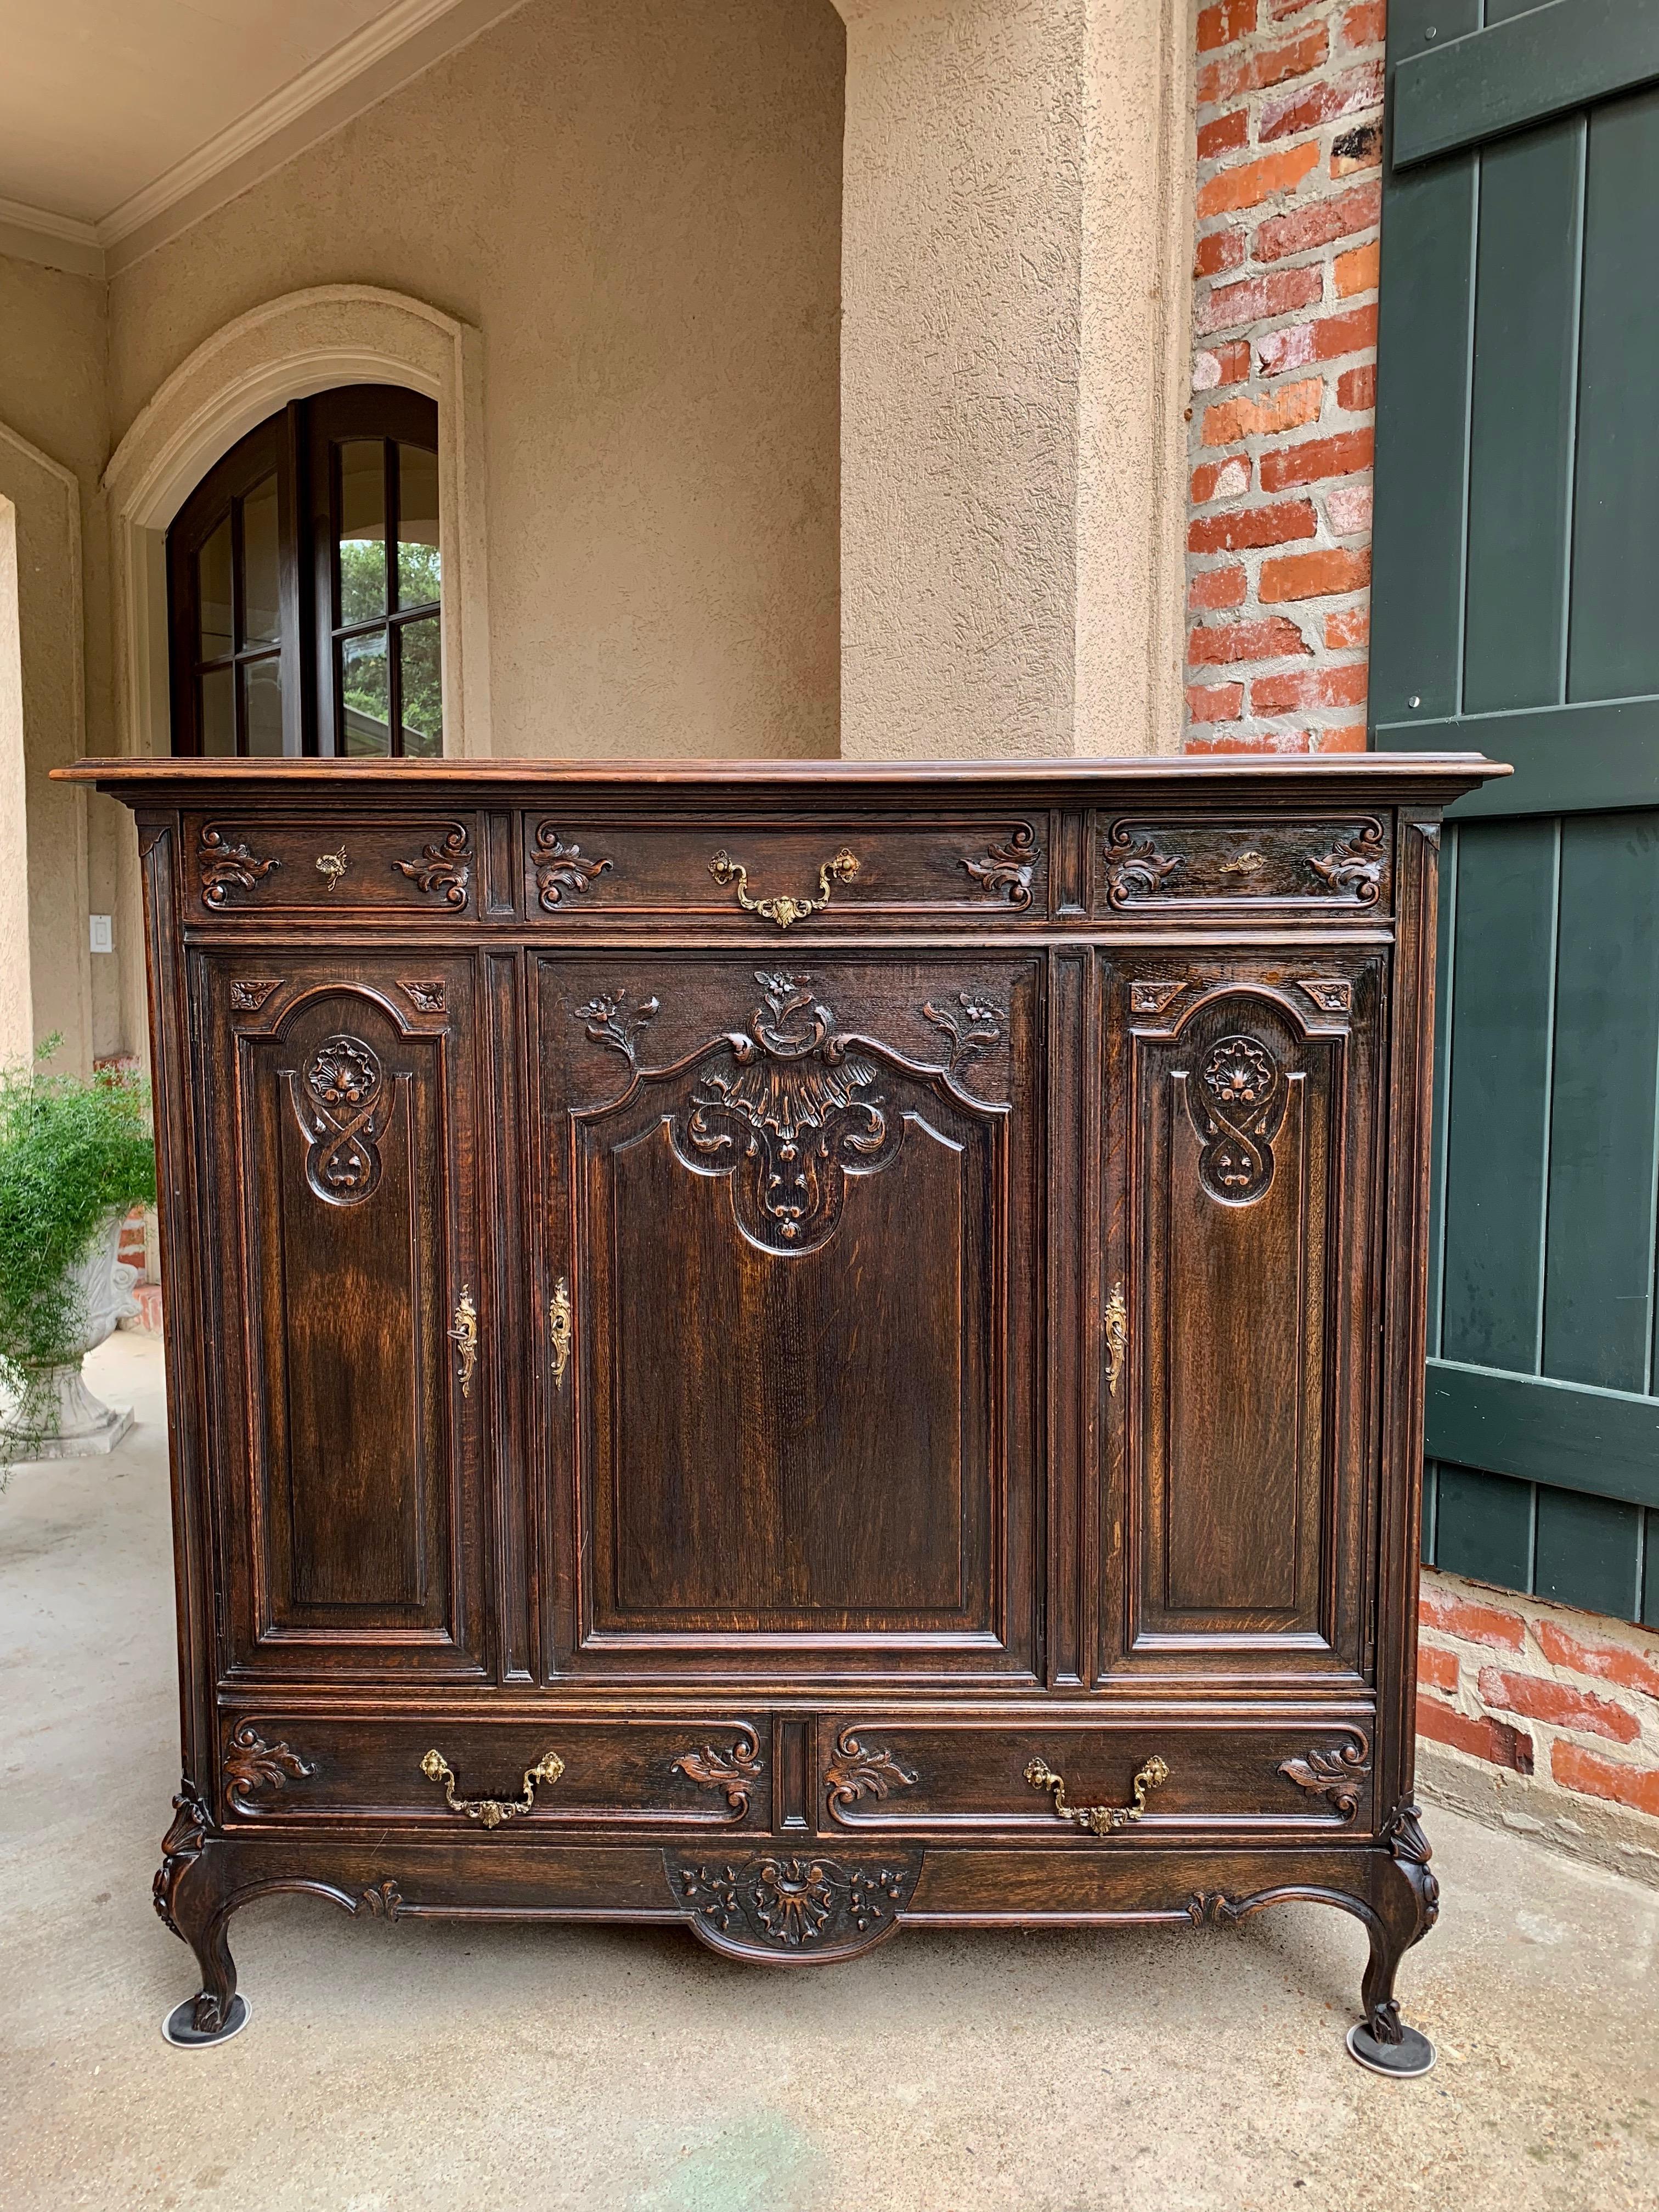 Direct from France, this gorgeous carved Louis XV style cabinet is one of a matching pair purchased directly from an estate in France. We are selling the cabinets separately
~Extra tall with an elegant French silhouette and carved from top to